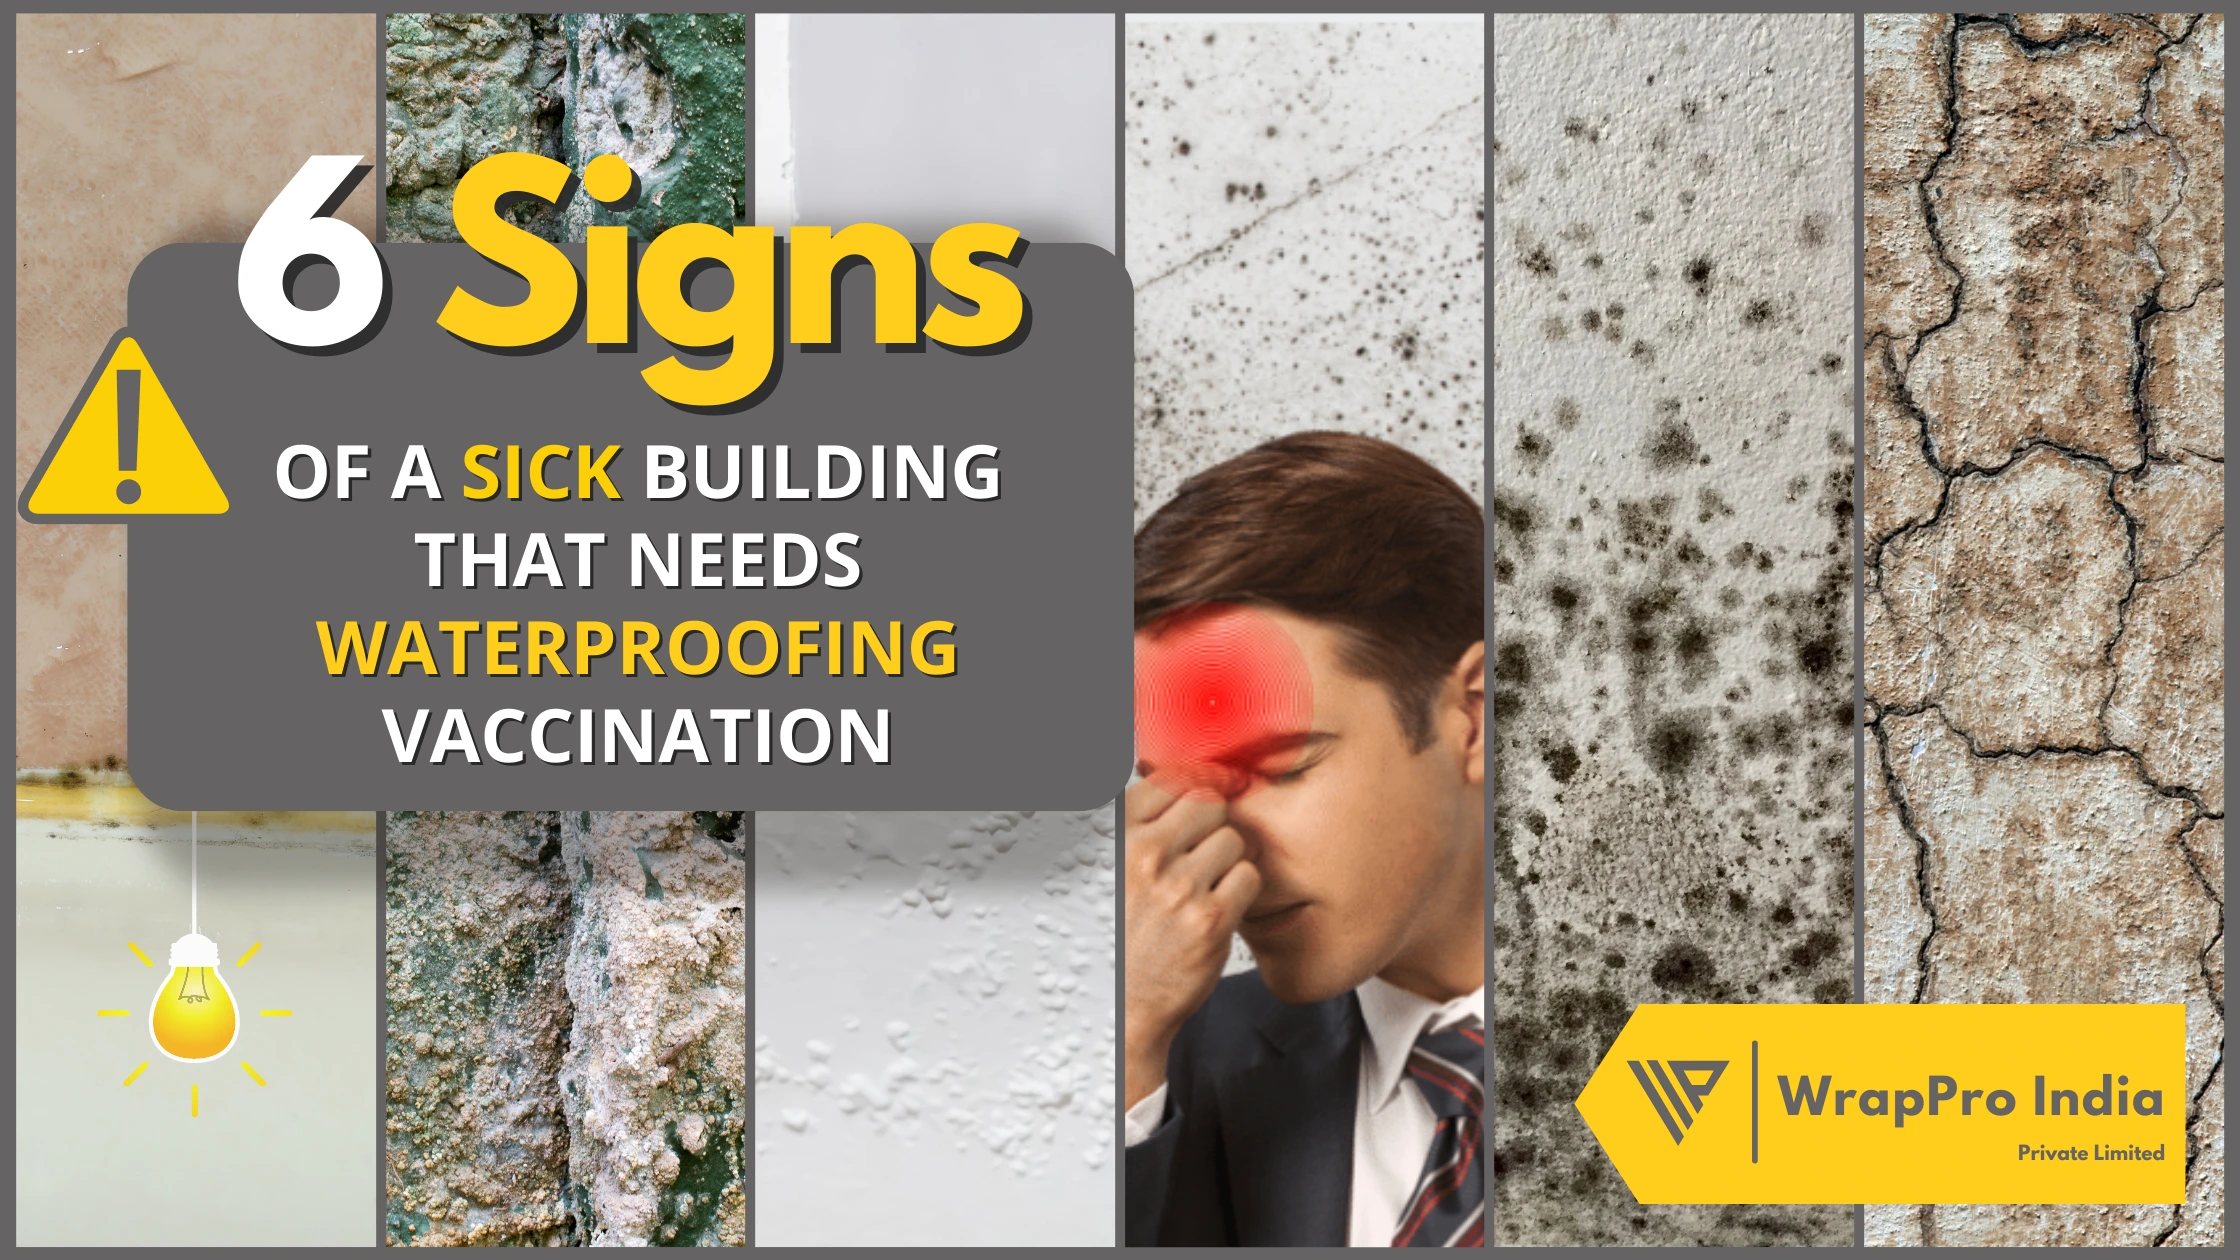 6 Signs of a Sick Building that needs Waterproofing Vaccination